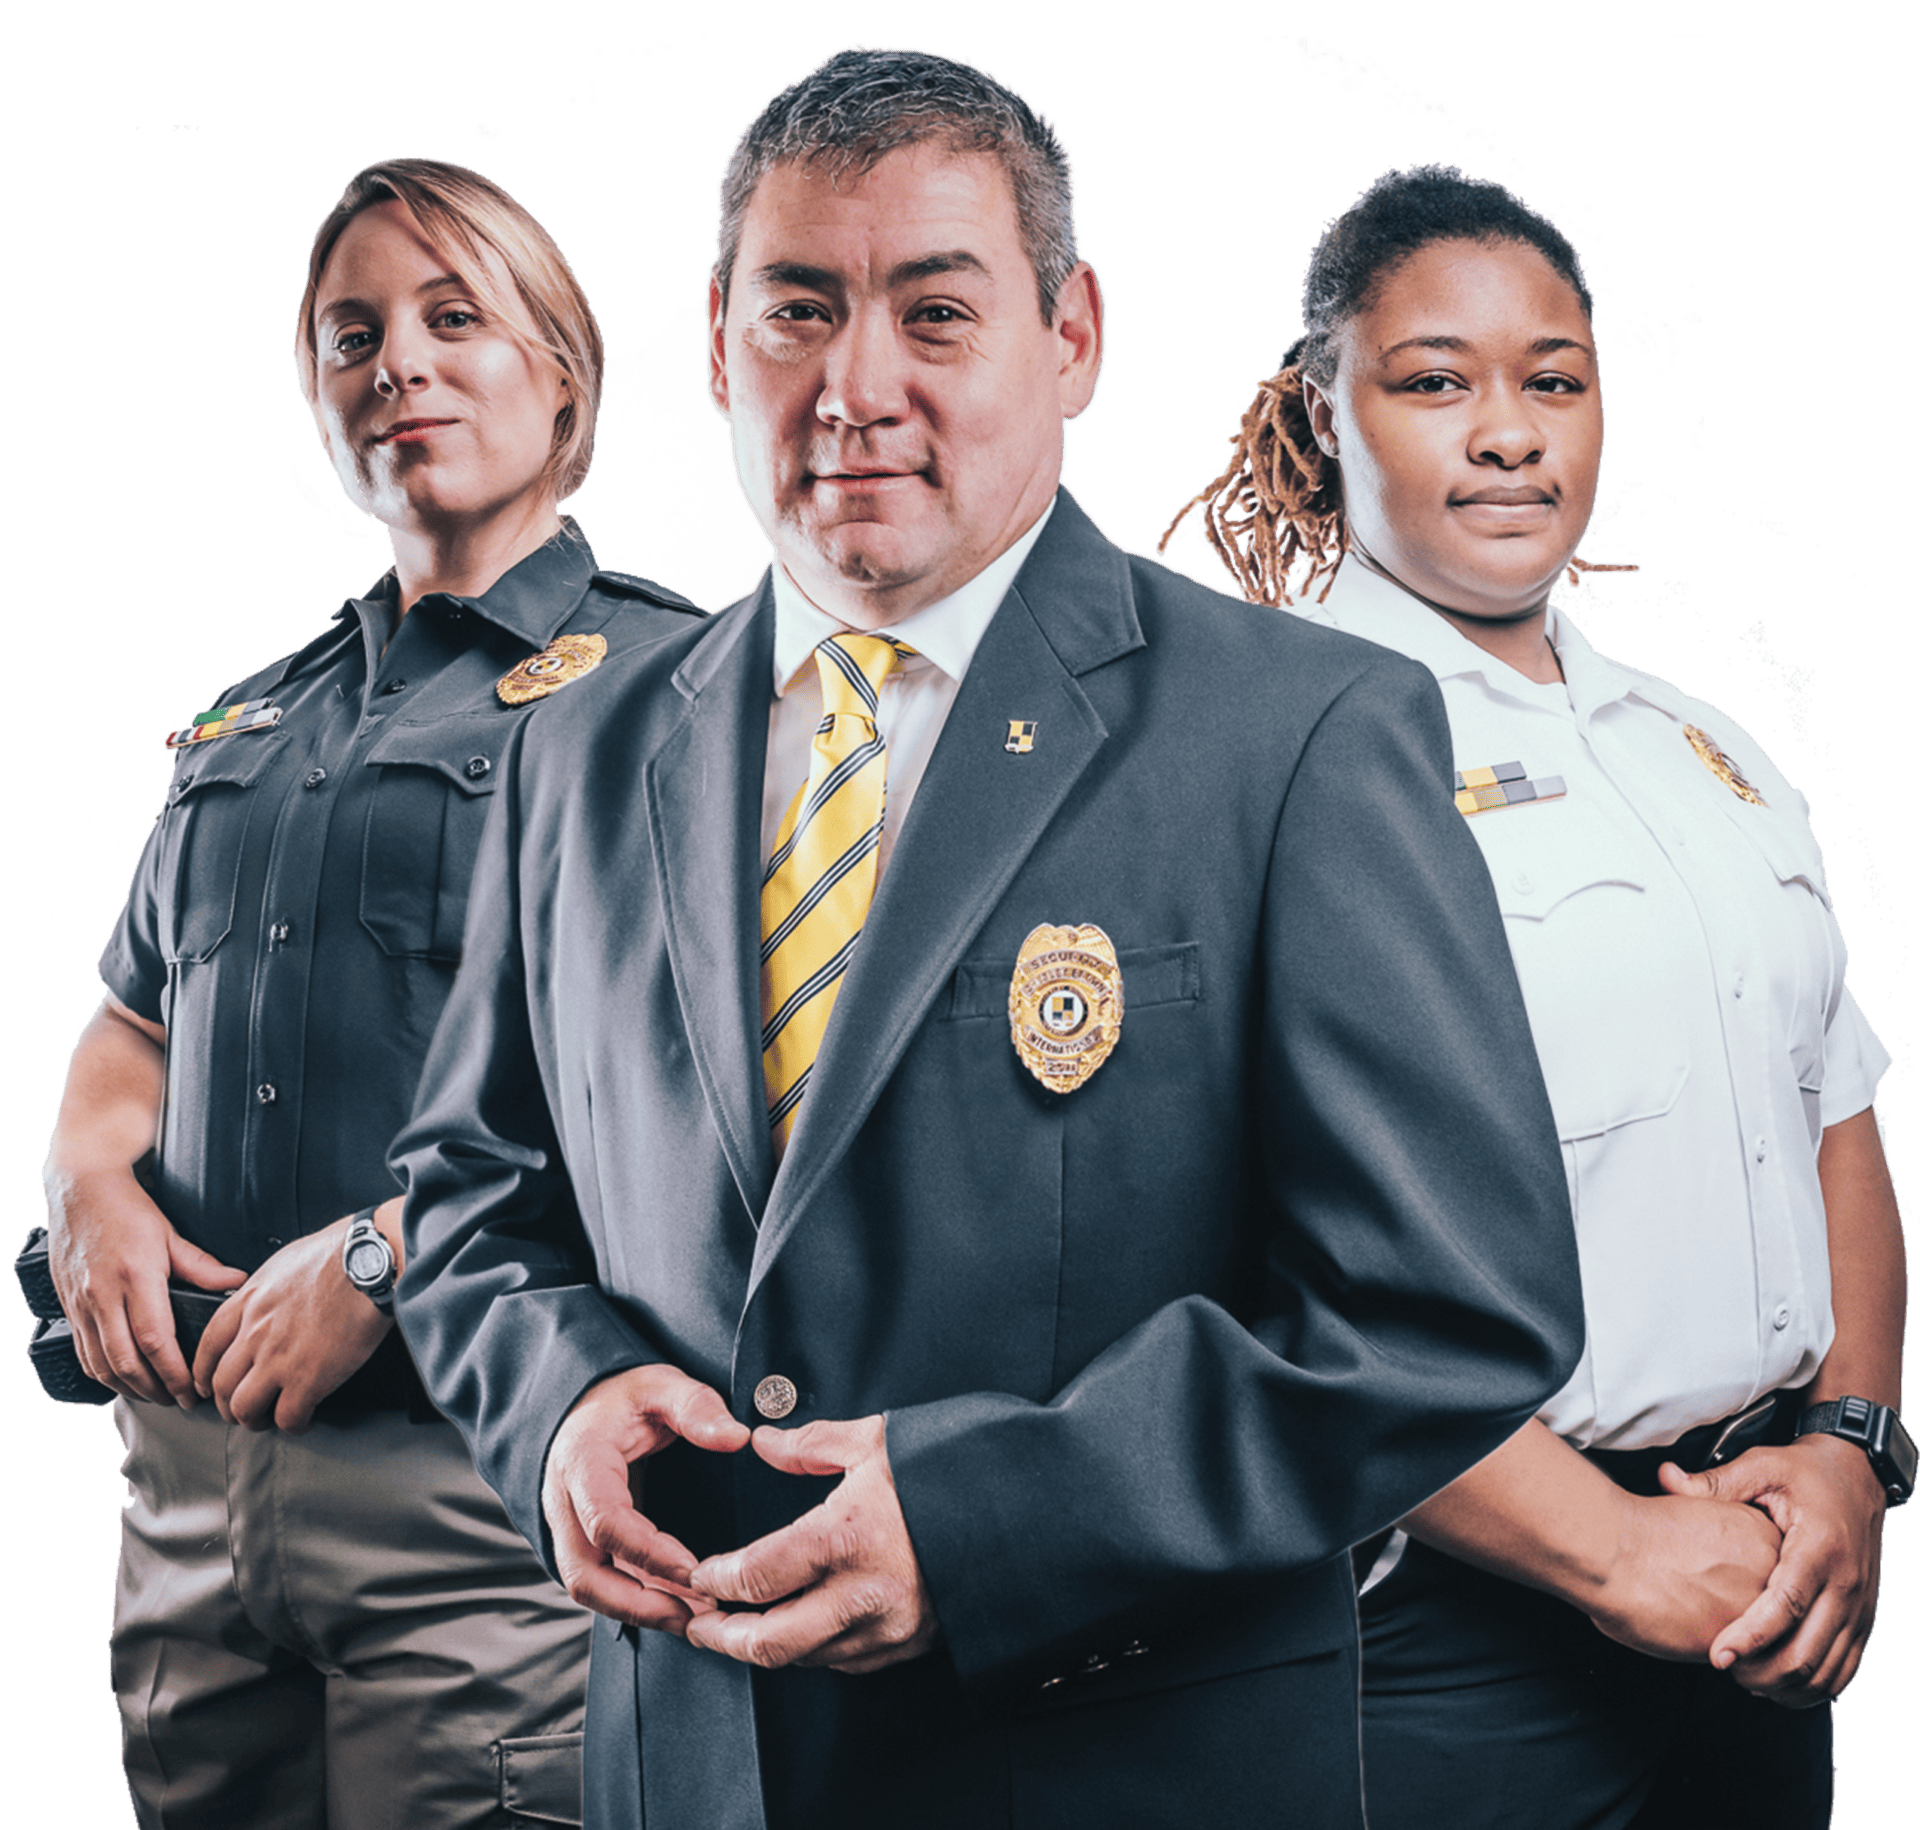 An image showing three security officers in uniform smiling at camera. Choosing the best security companies in dallas texas is a tough job. Chesley Brown makes it easy.